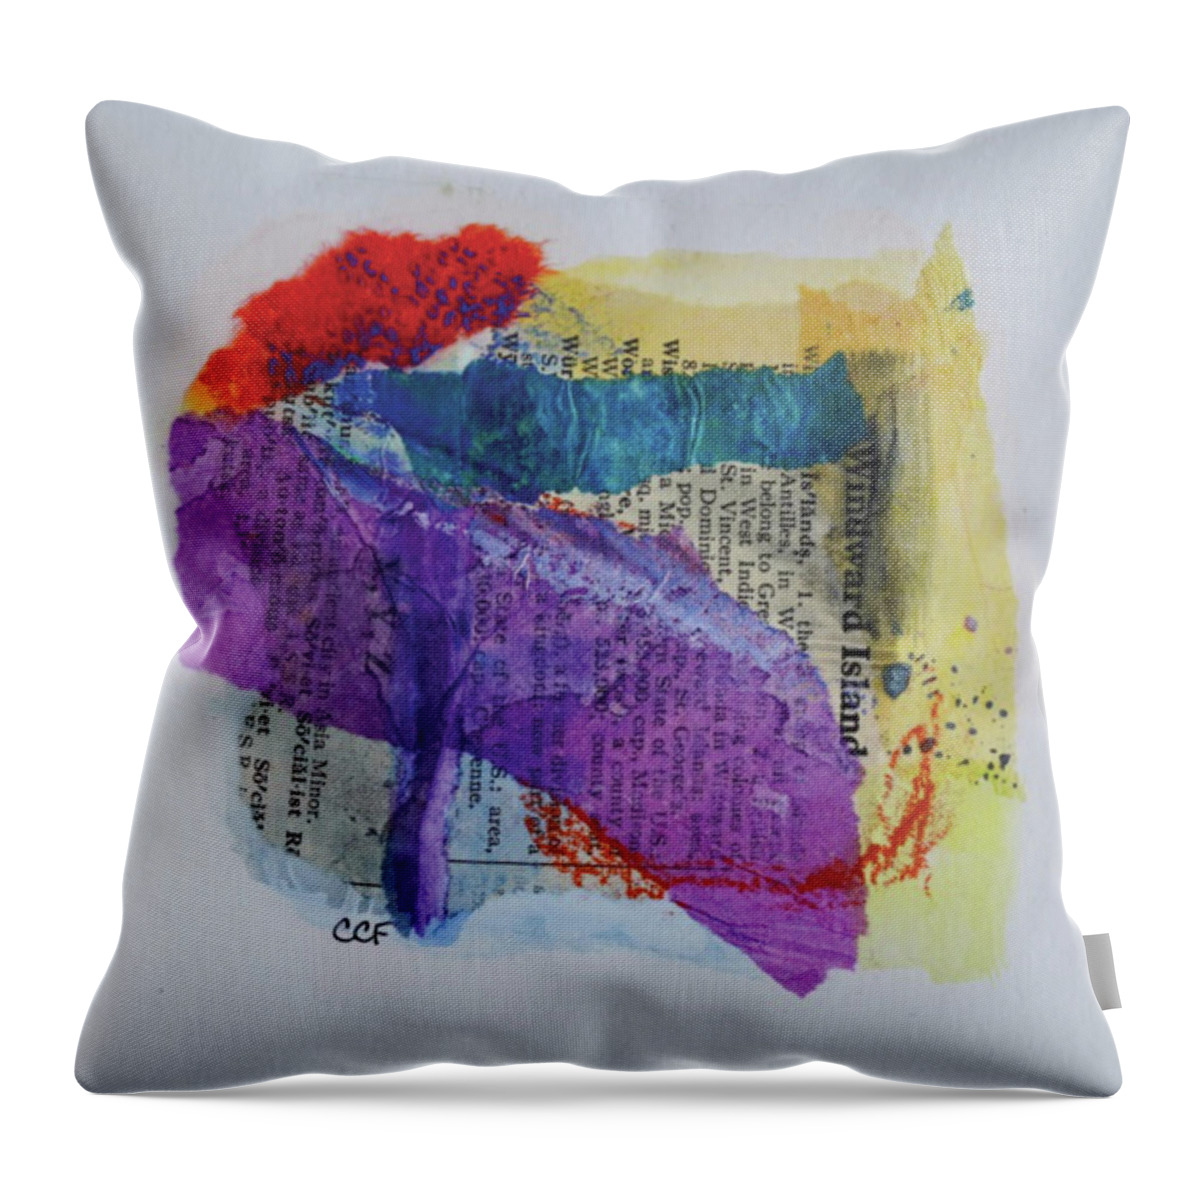 Mixed Media Throw Pillow featuring the mixed media Chapter 4 by Christine Chin-Fook